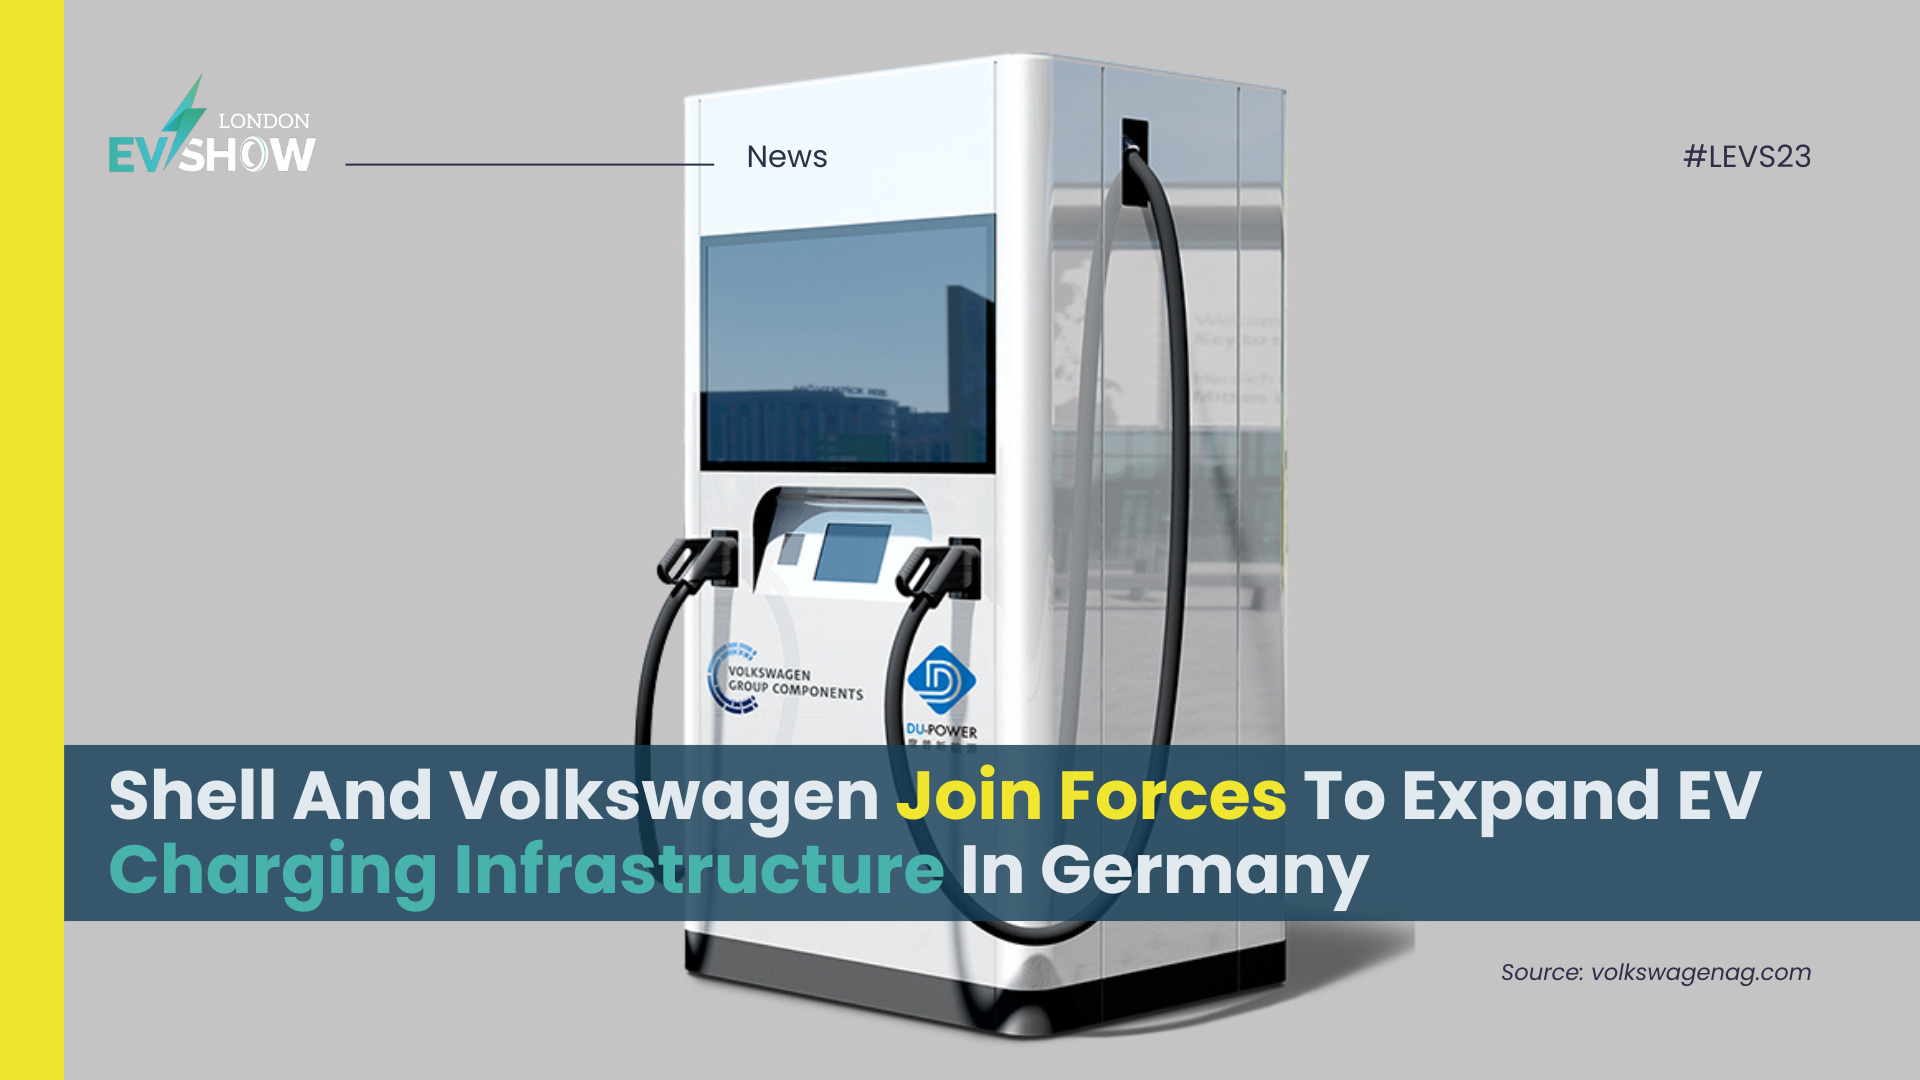 Shell And Volkswagen Join Forces To Expand EV Charging Infrastructure In Germany